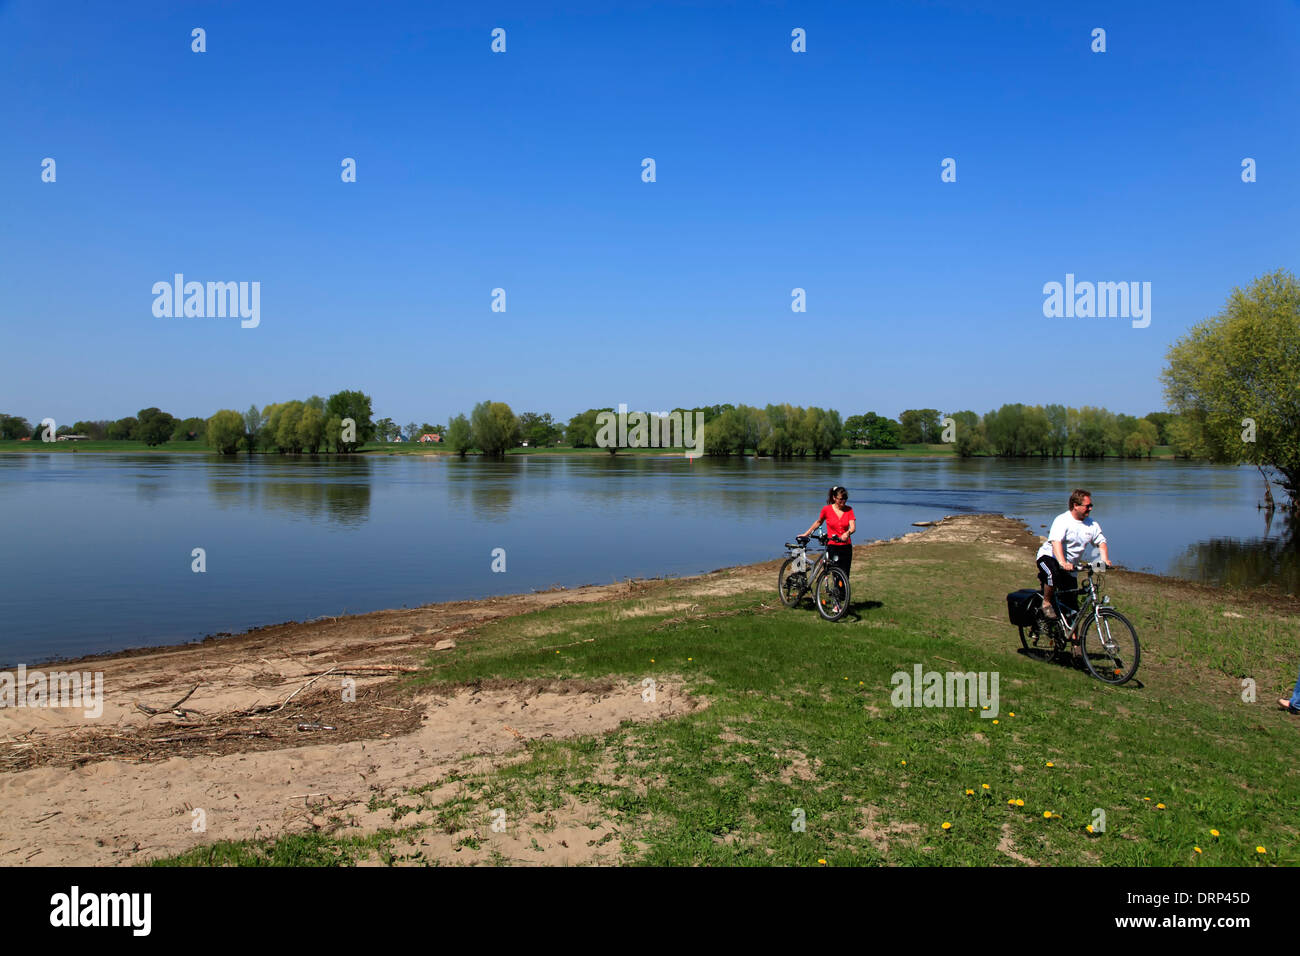 Cyclist in Vietze, Elbe river cycle route, Lower Saxony, Germany, Europe Stock Photo